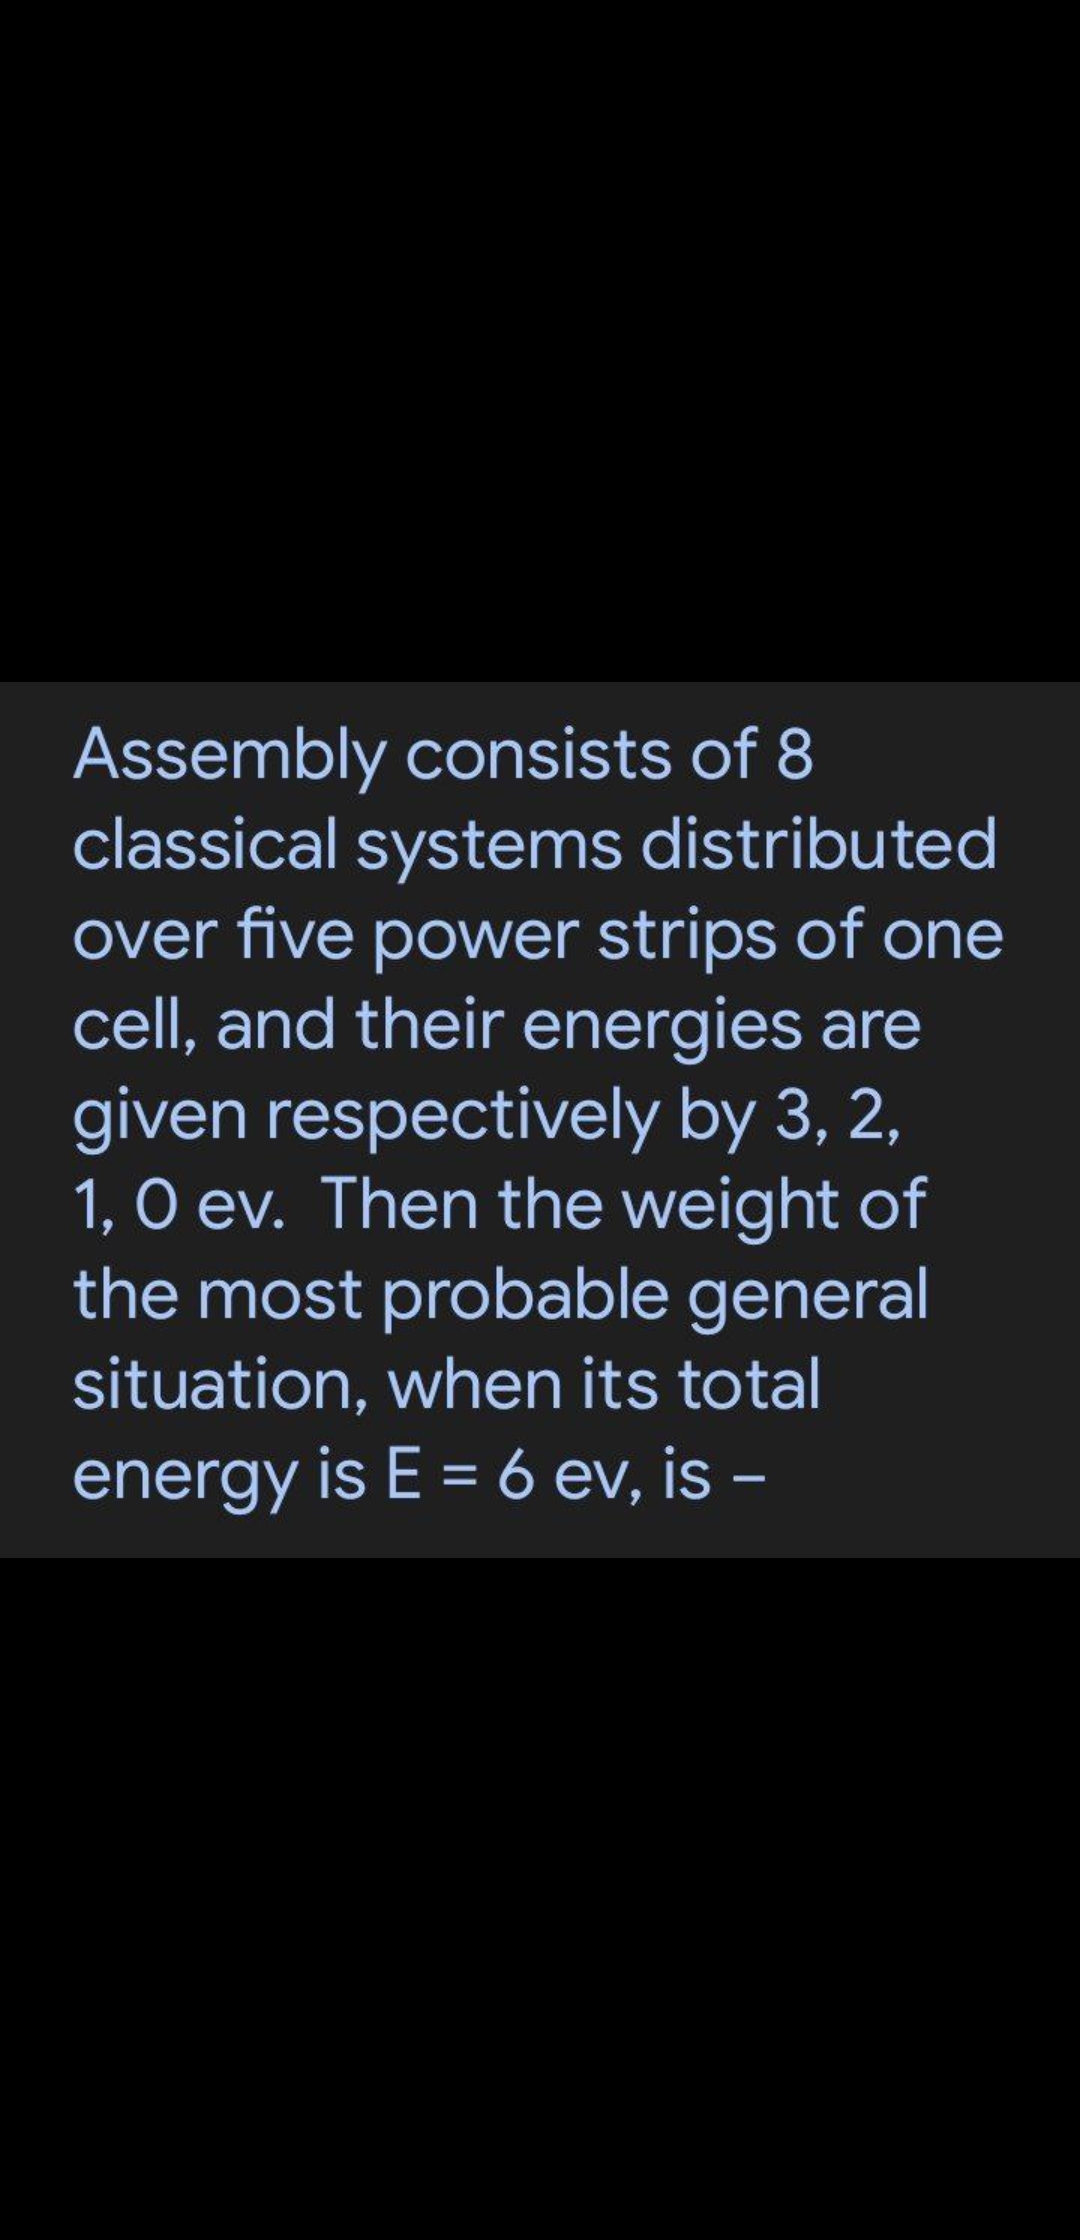 Assembly consists of 8
classical systems distributed
over five power strips of one
cell, and their energies are
given respectively by 3, 2,
1, O ev. Then the weight of
the most probable general
situation, when its total
energy is E = 6 ev, is –
-
